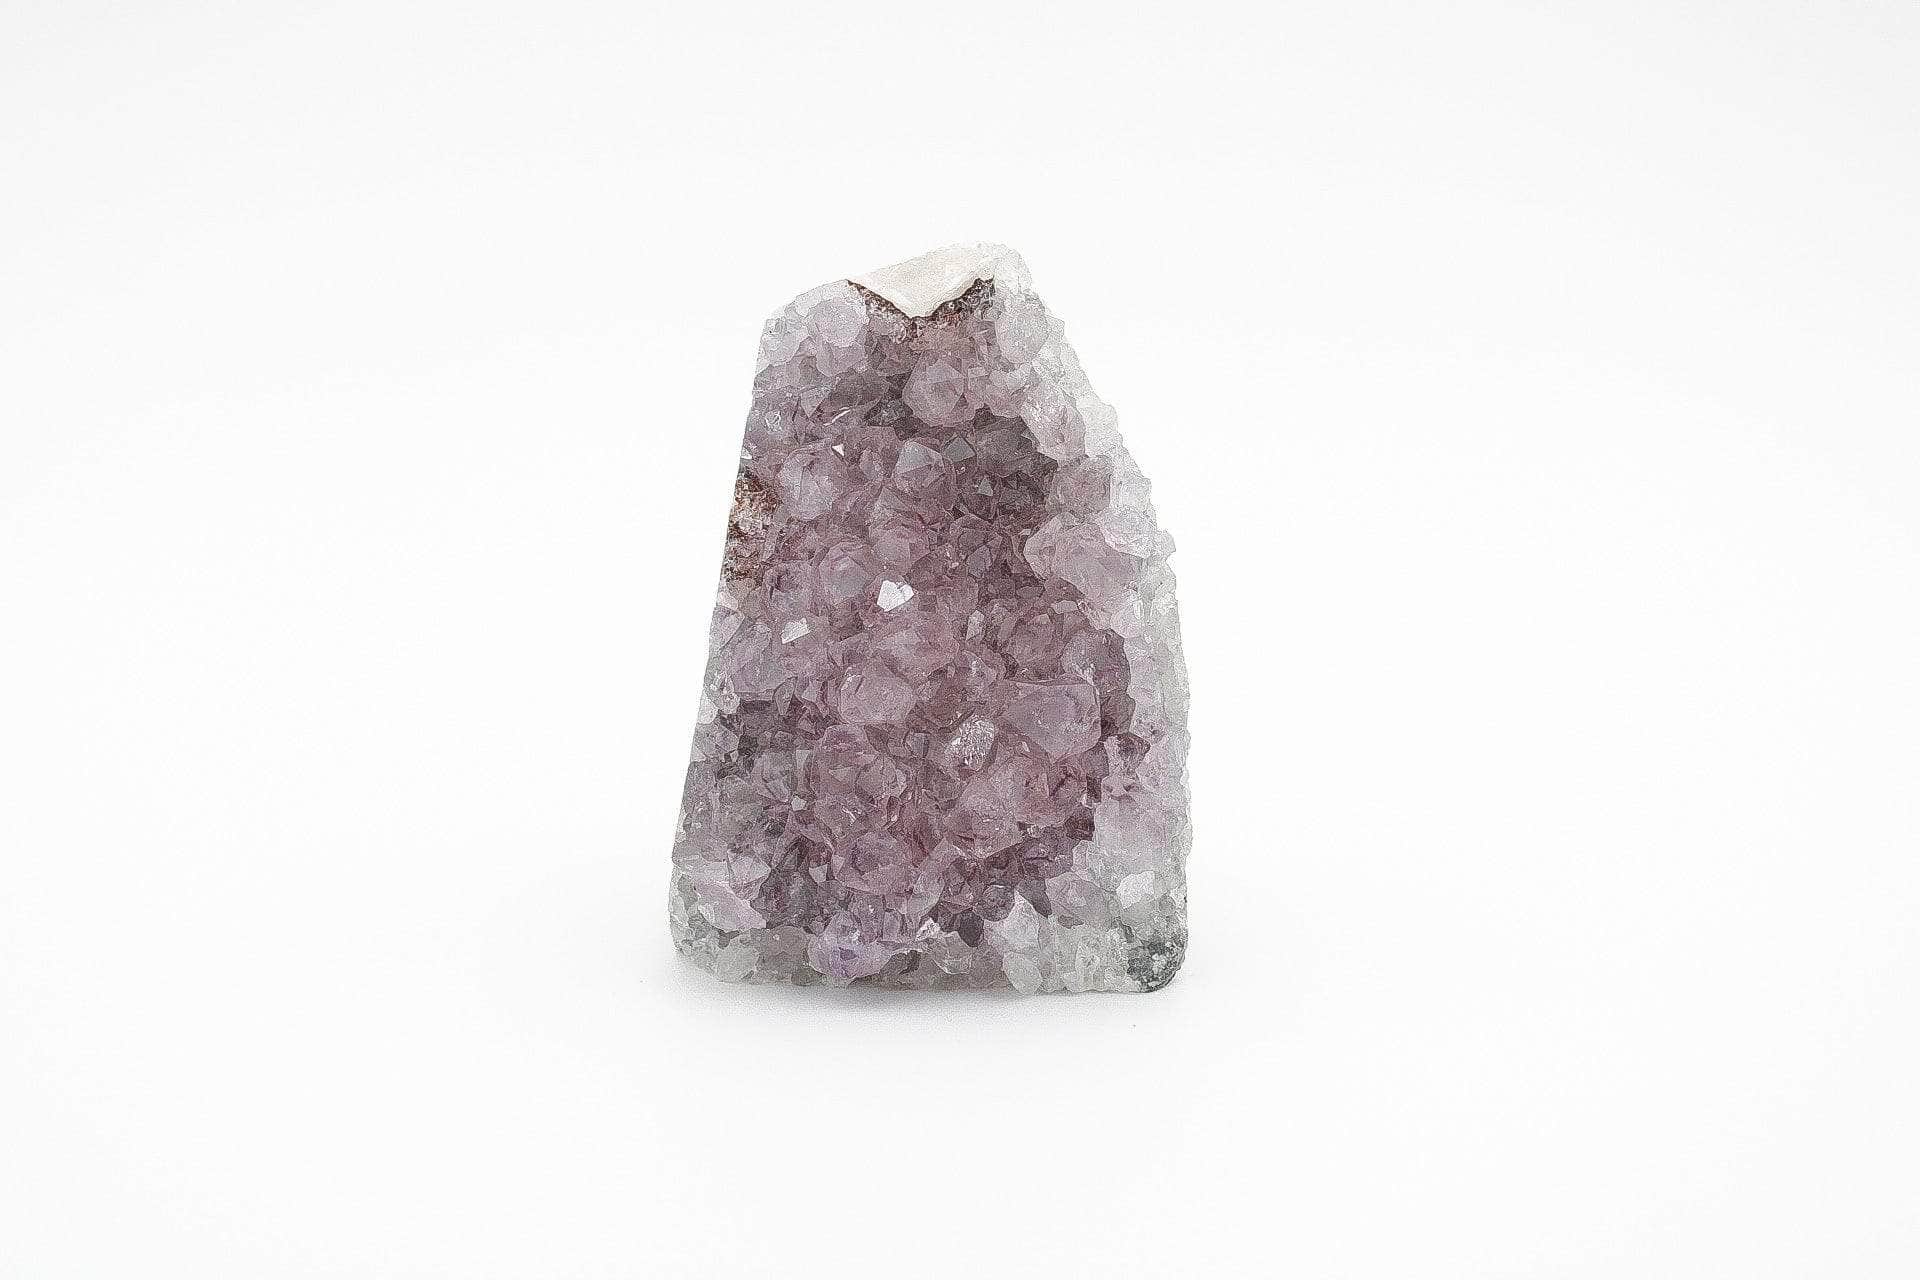 6-11 Crystals Crystal Amethyst with Calcite (am-26) 3" x 3.25" x 4.5"